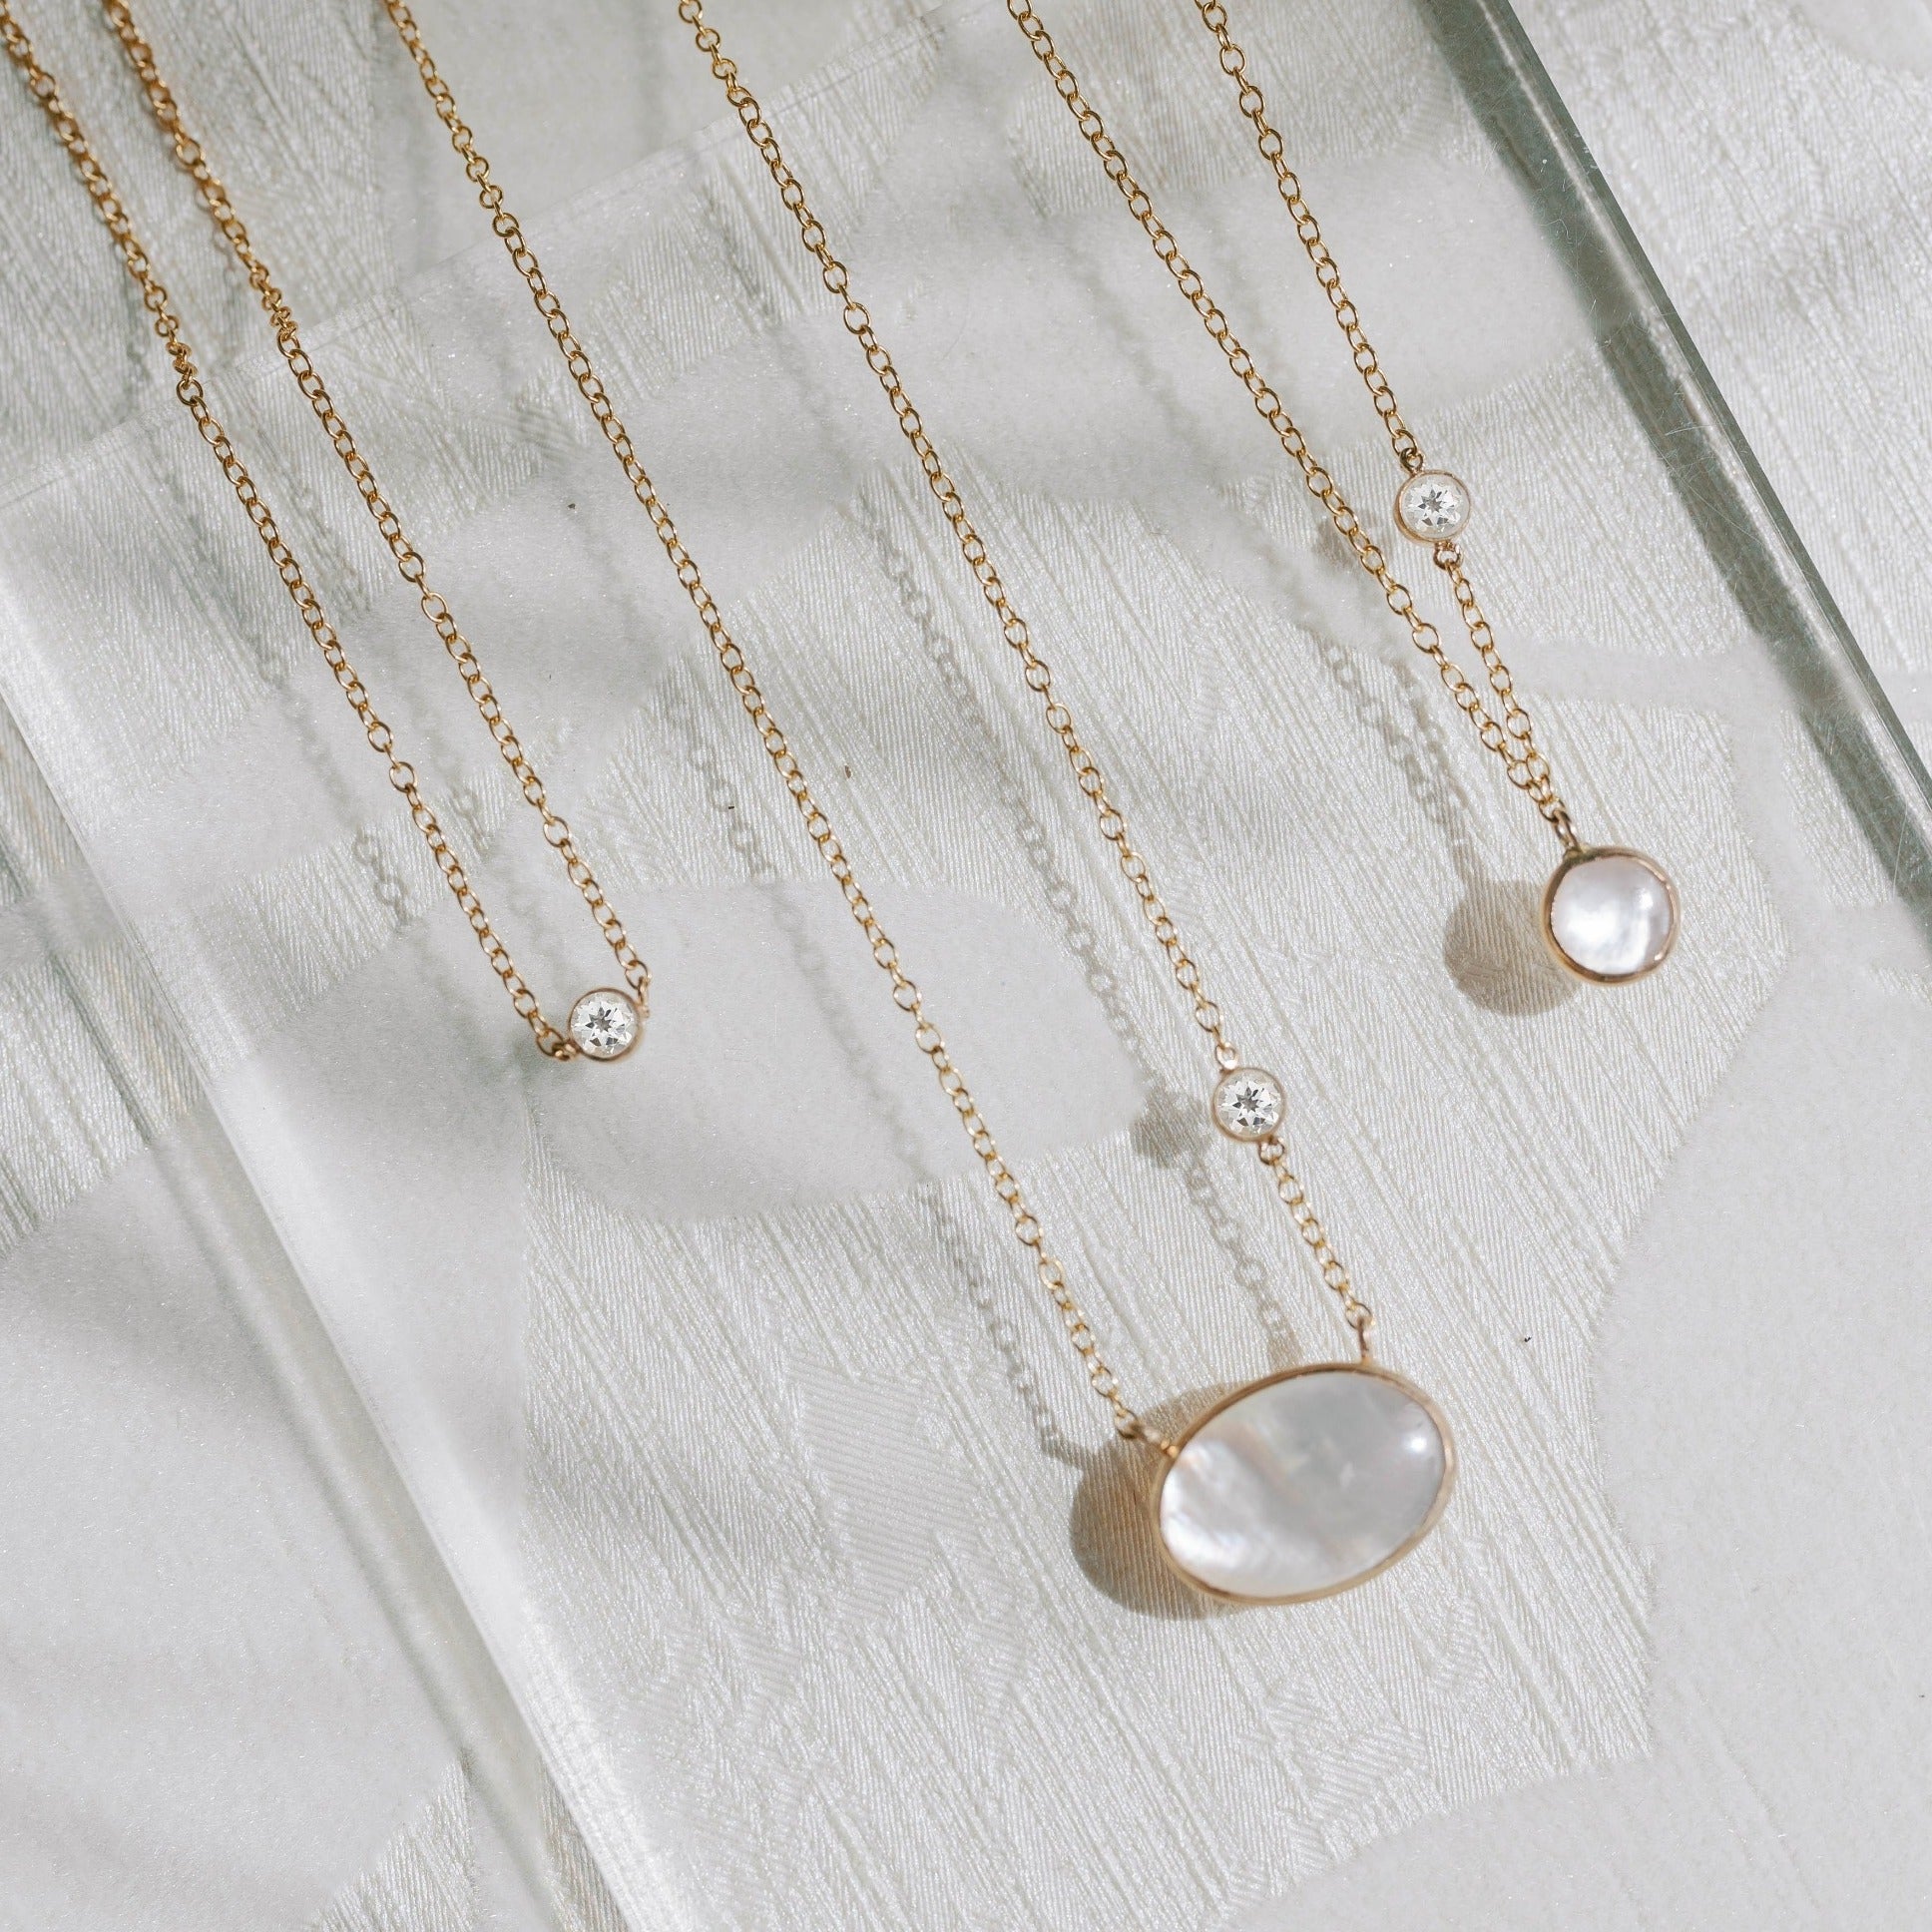 Mother of pearl pendant necklaces and white topaz gemstones. all recycled gold necklaces